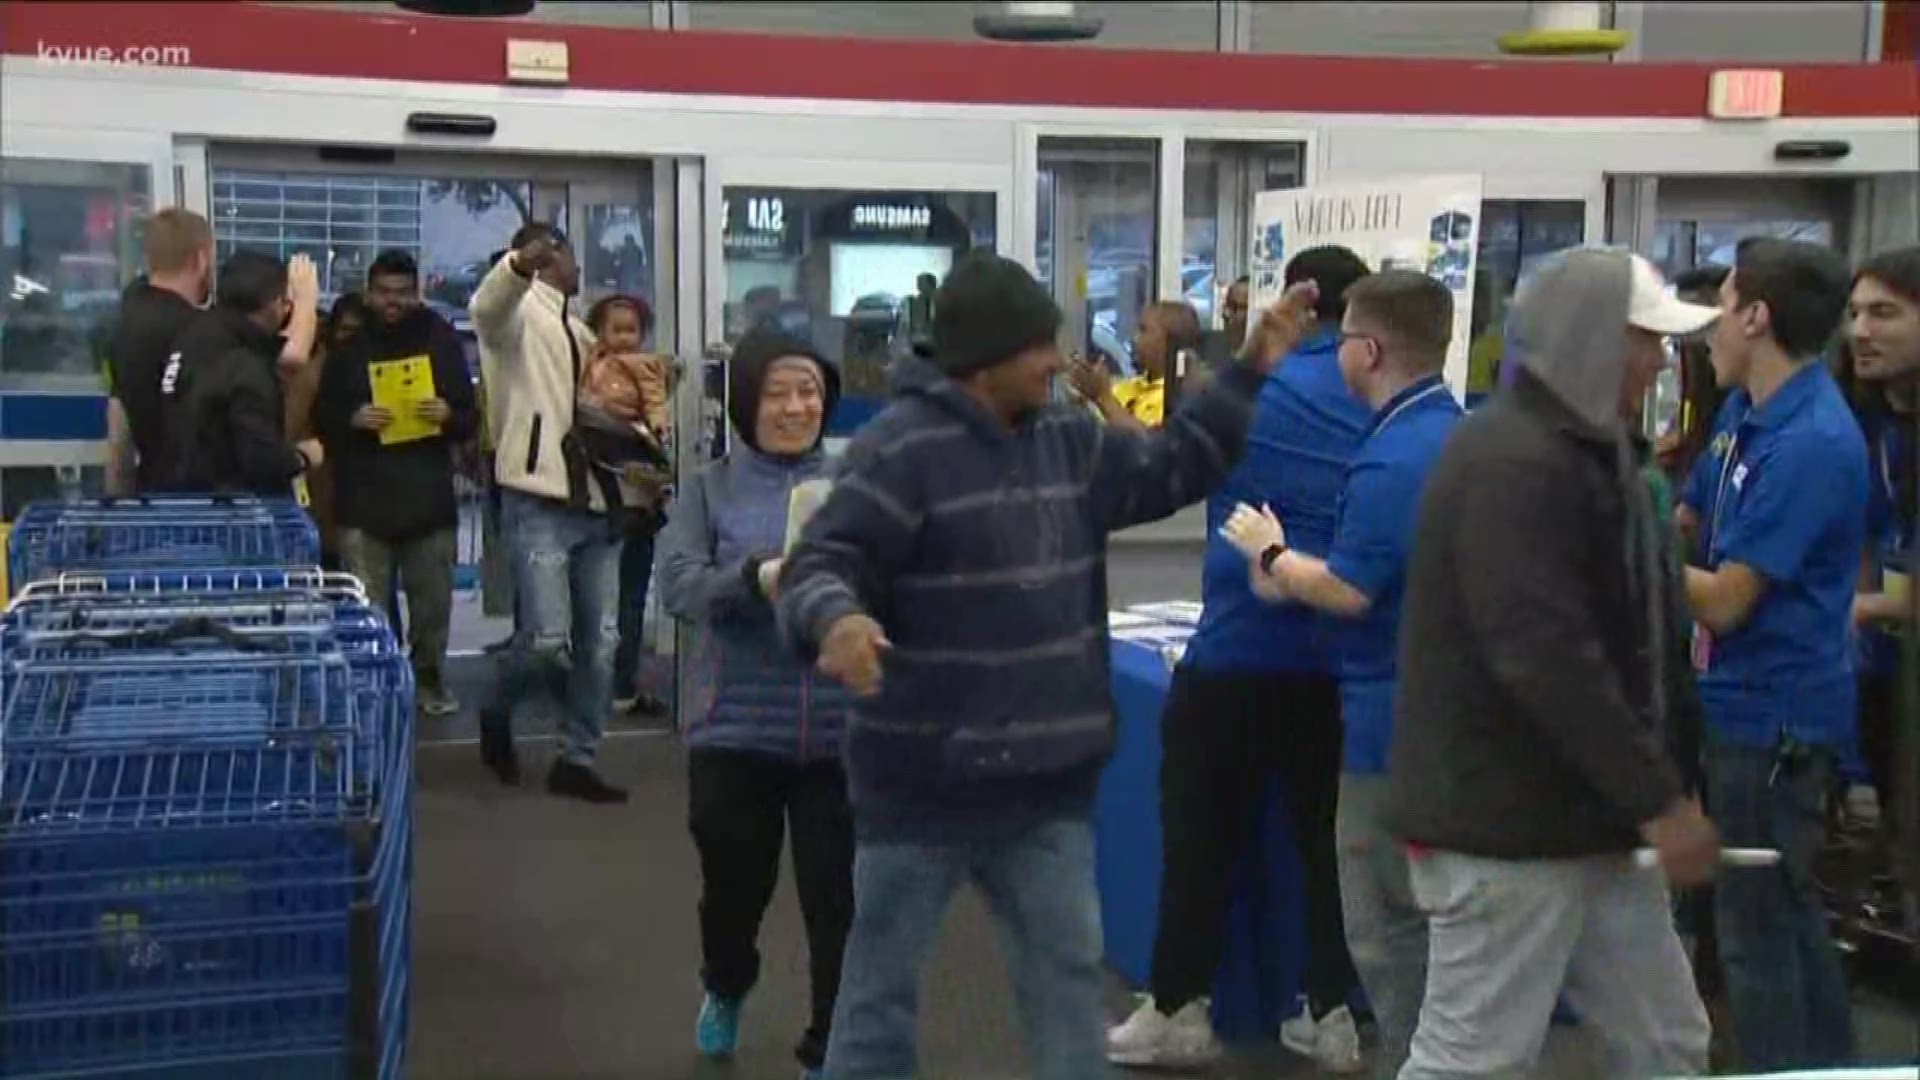 Many people are already out and about getting their hands on some early Black Friday deals.